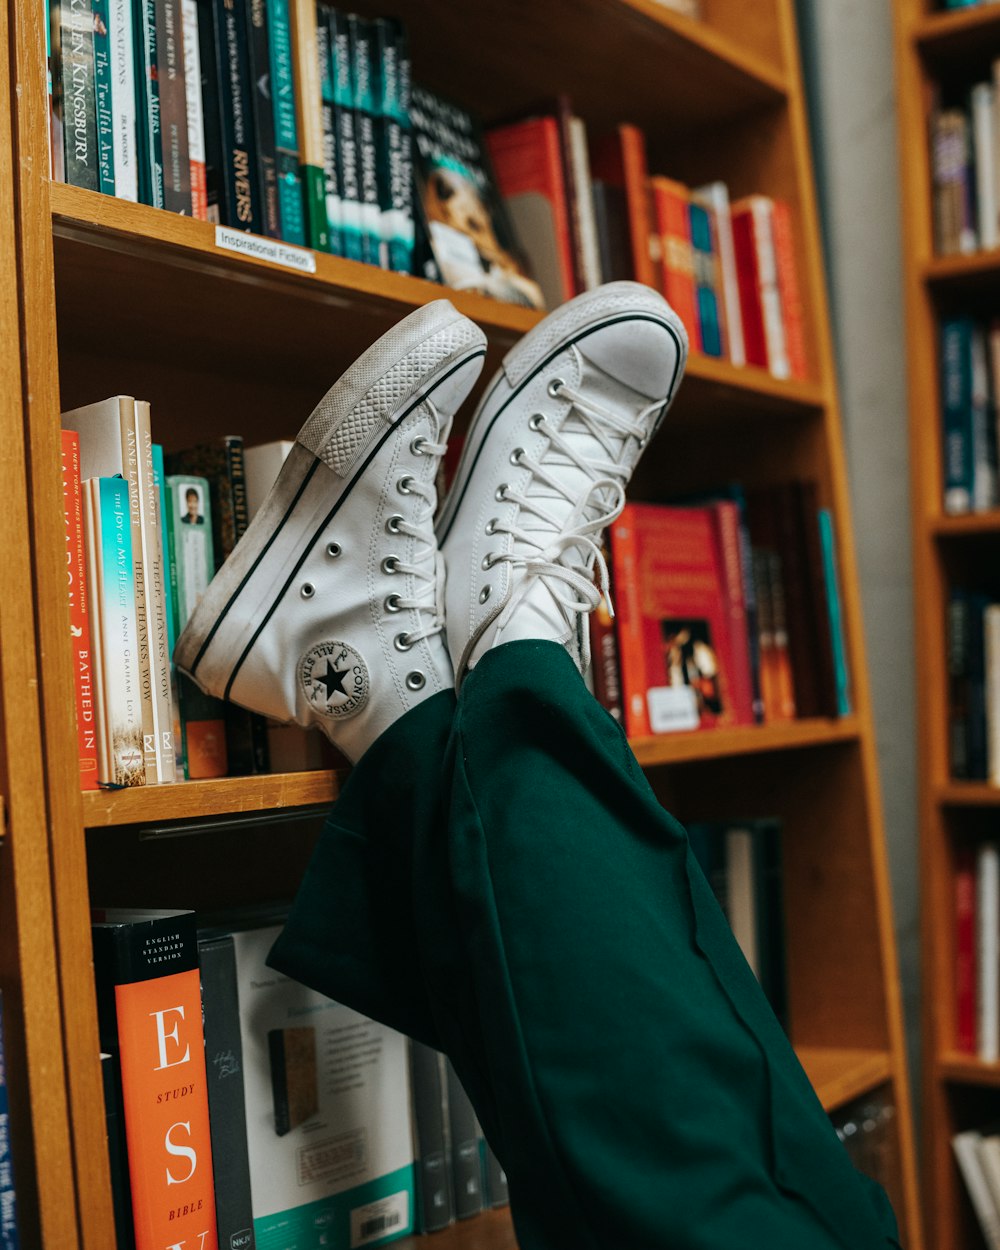 a person's feet resting on a book shelf in front of a bookshel